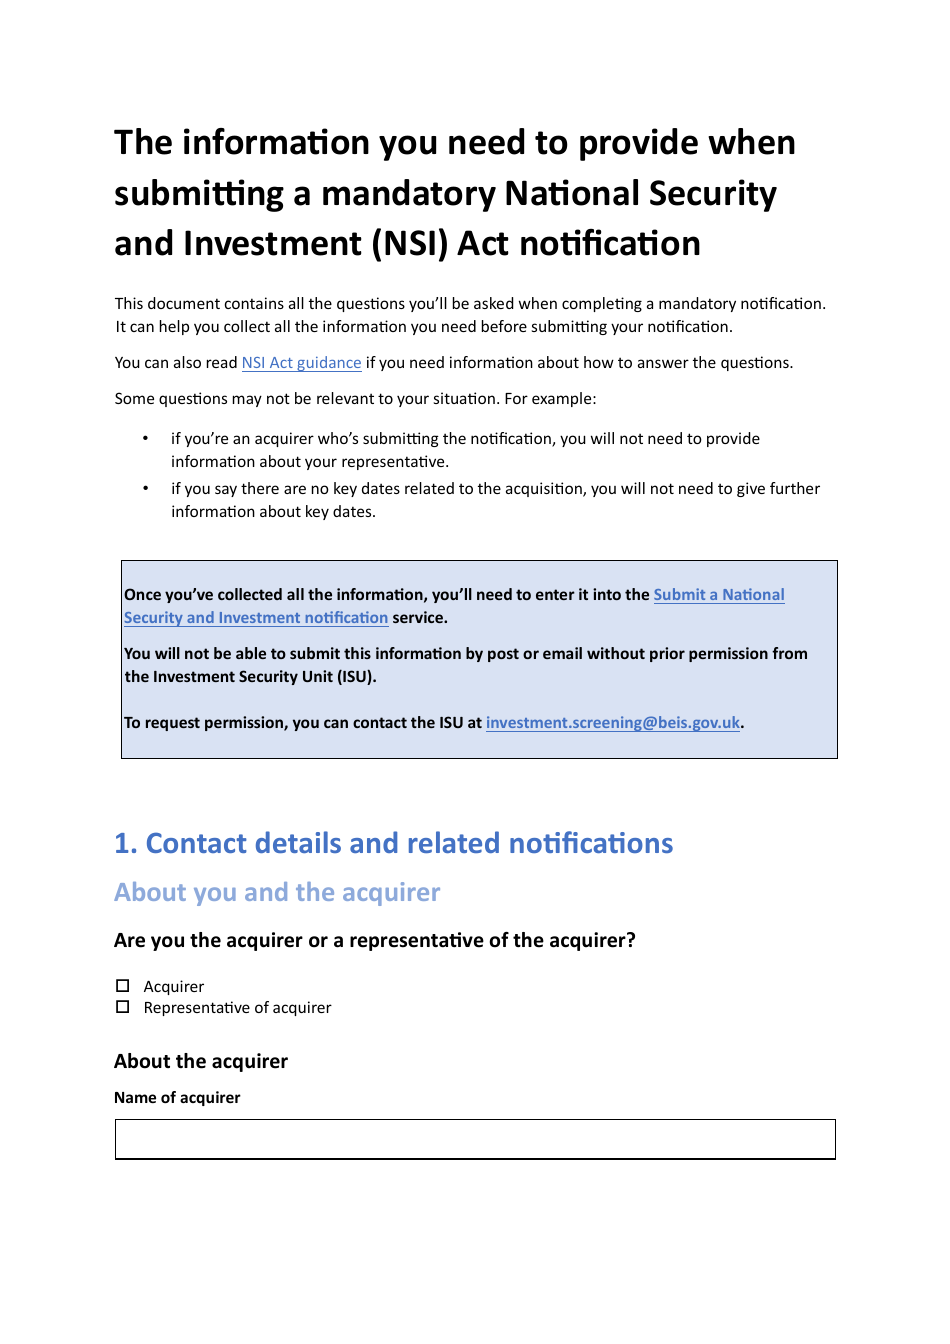 National Security and Investment (Nsi) Act Mandatory Notification Form - United Kingdom, Page 1